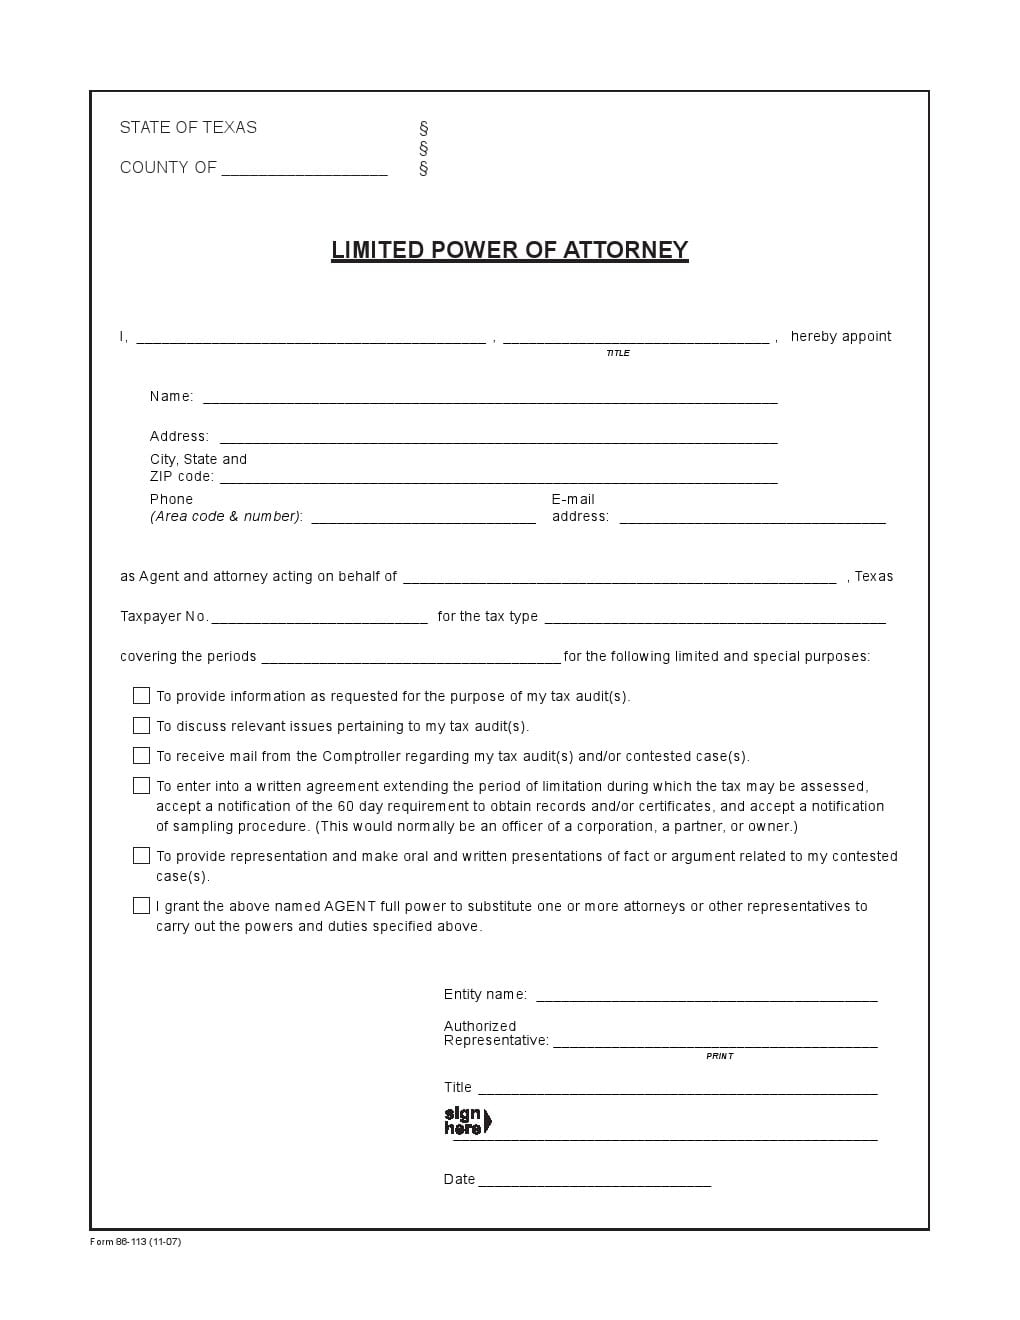 Free Texas Limited Power Of Attorney Form For Tax Audits 